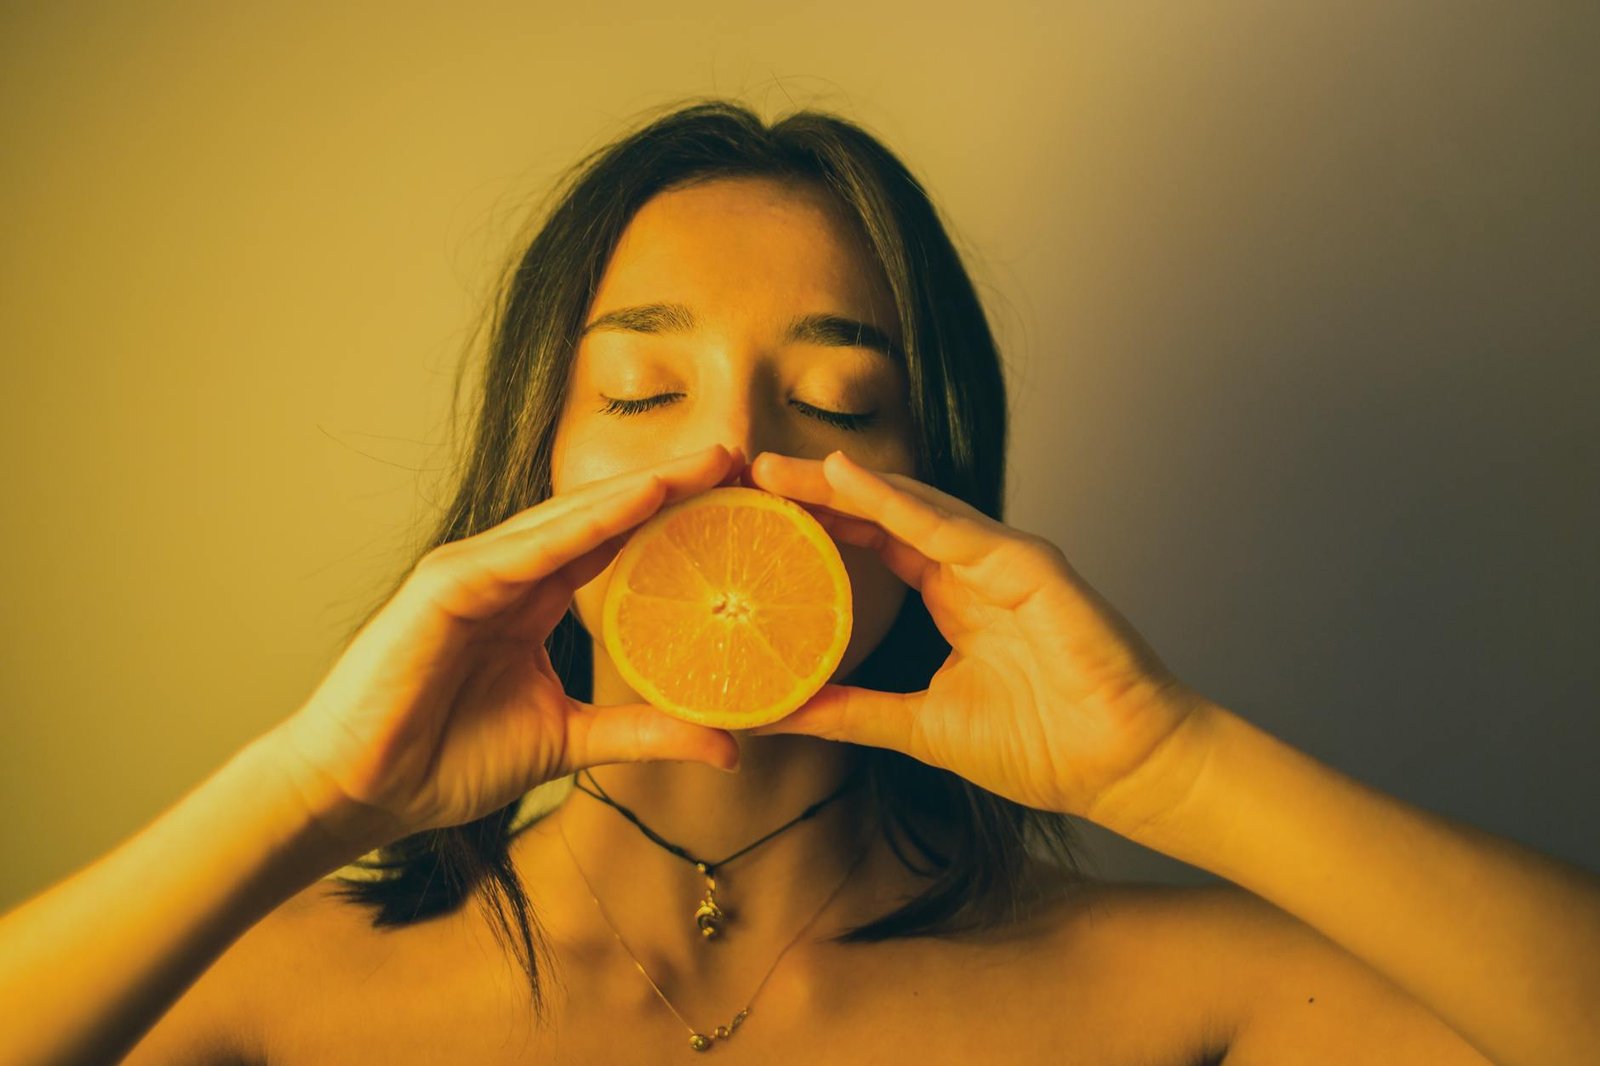 attractive woman with eyes closed holding orange slice against lips